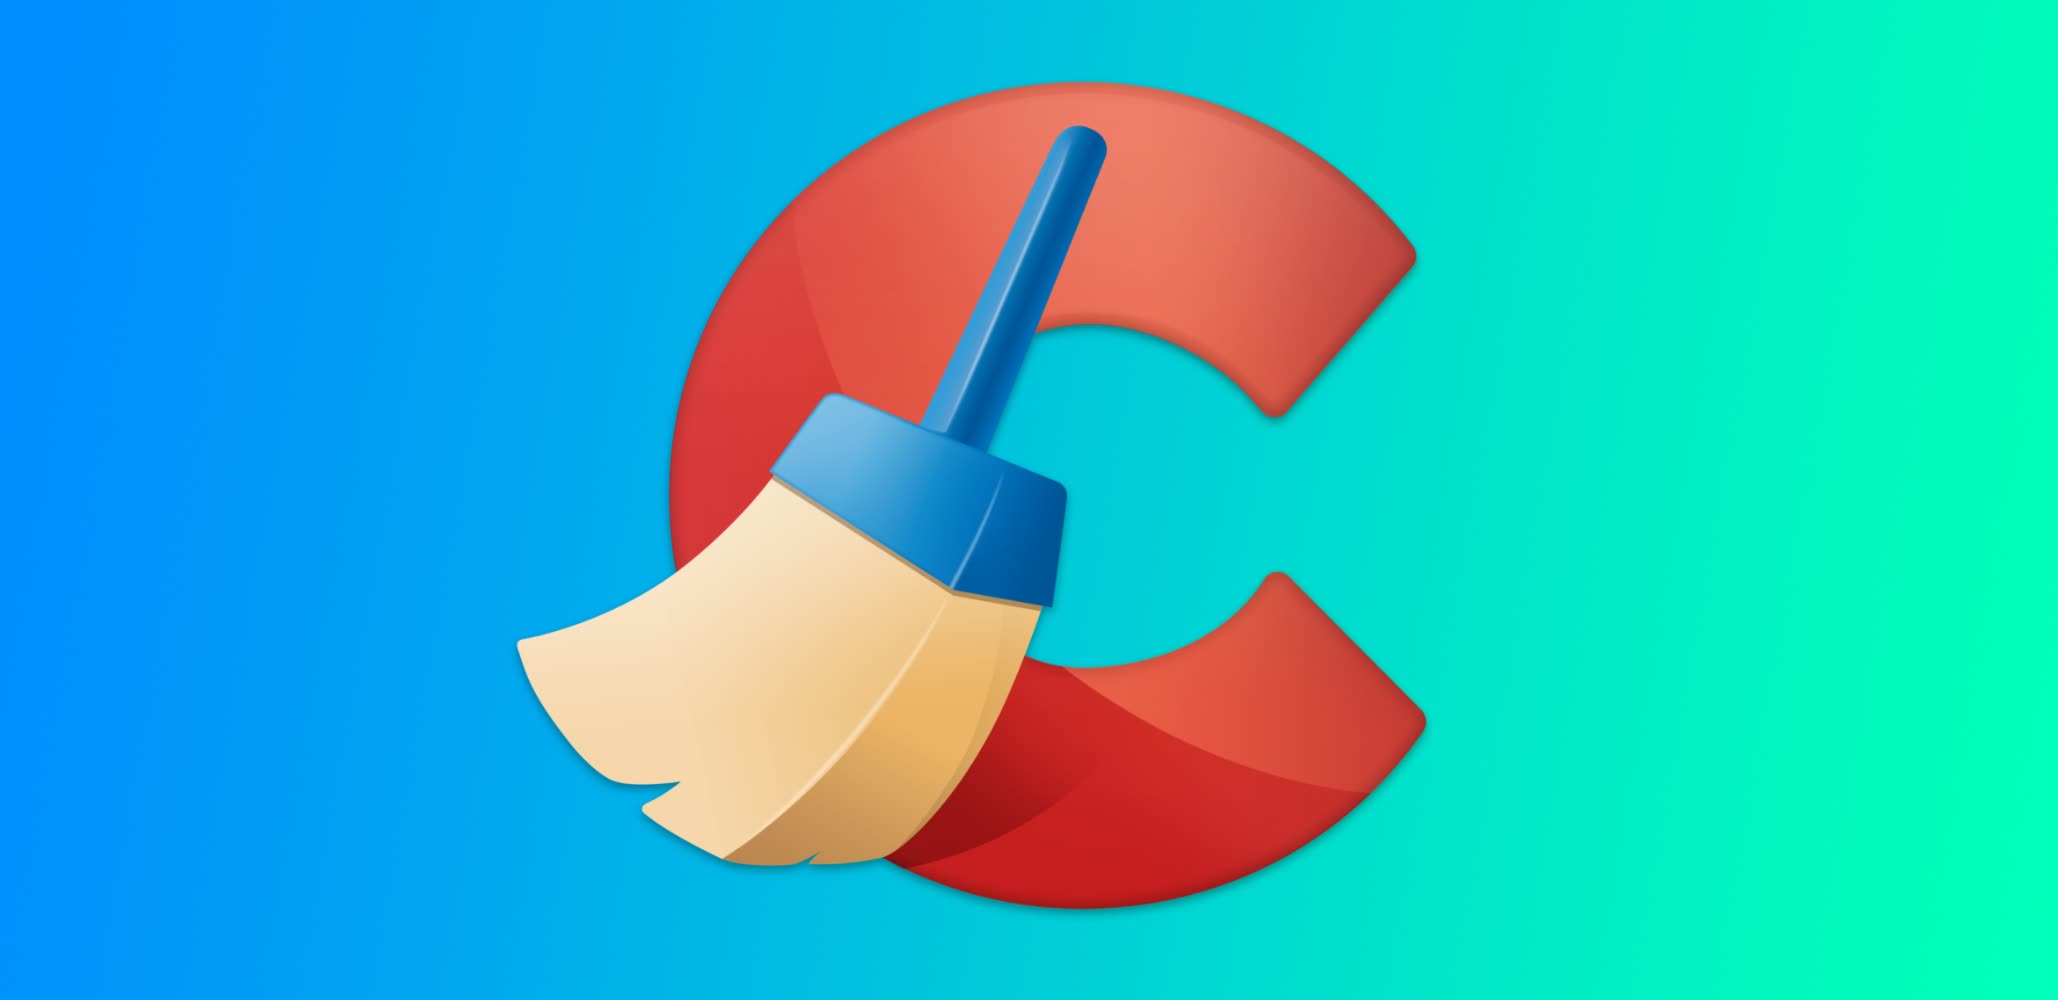 Get CCleaner Professional for just $1, only for a limited time